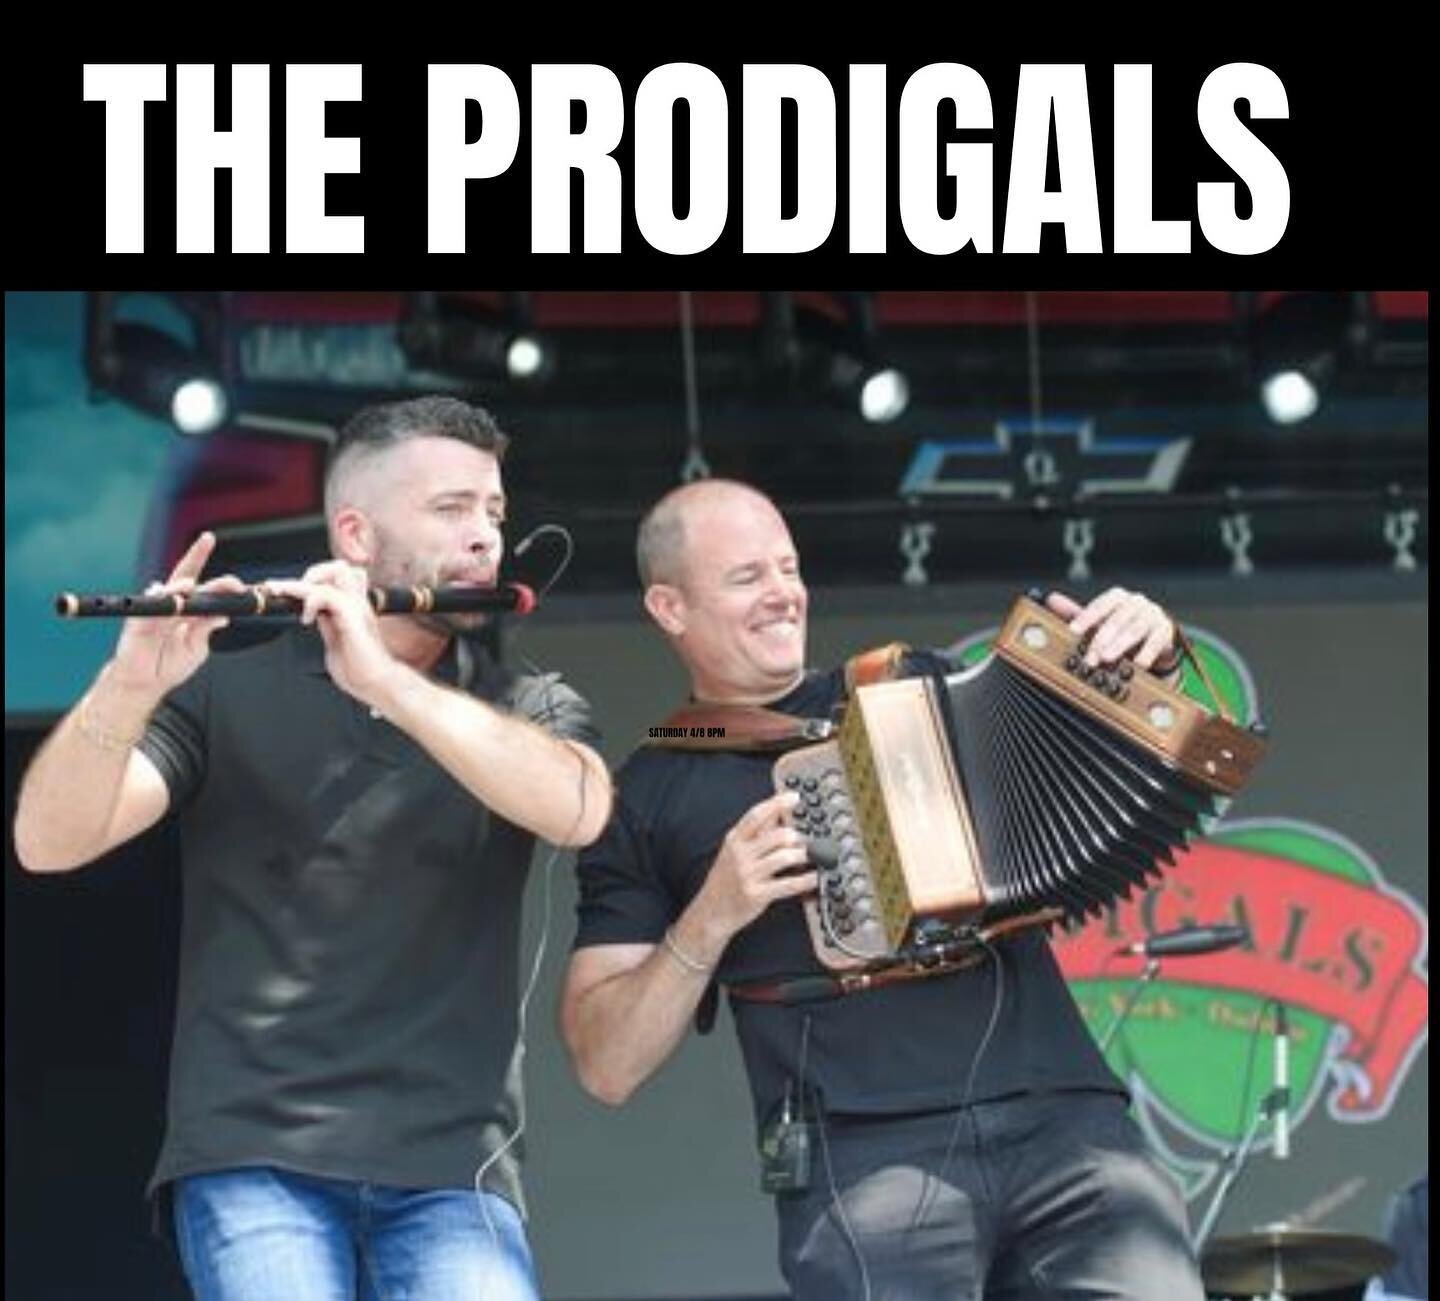 Join us tomorrow night for the Prodigals at 9pm! We love this band!